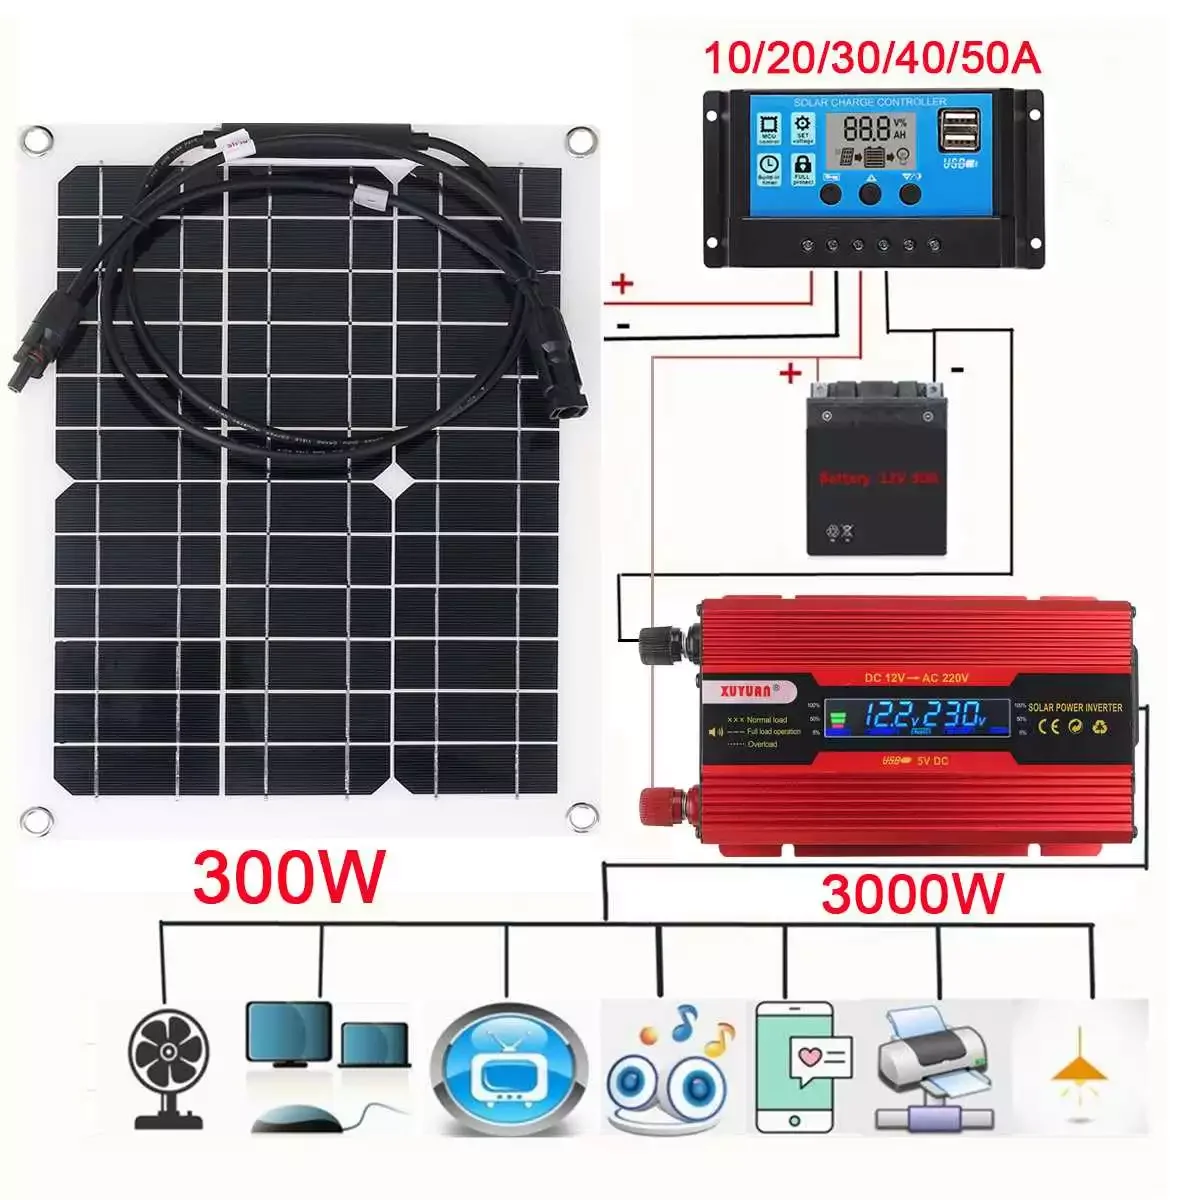 

3000W Solar Power System Kit Battery Charger 300W Solar Panel 10-50A Charge Controller Complete Power Generation Home Grid Camp